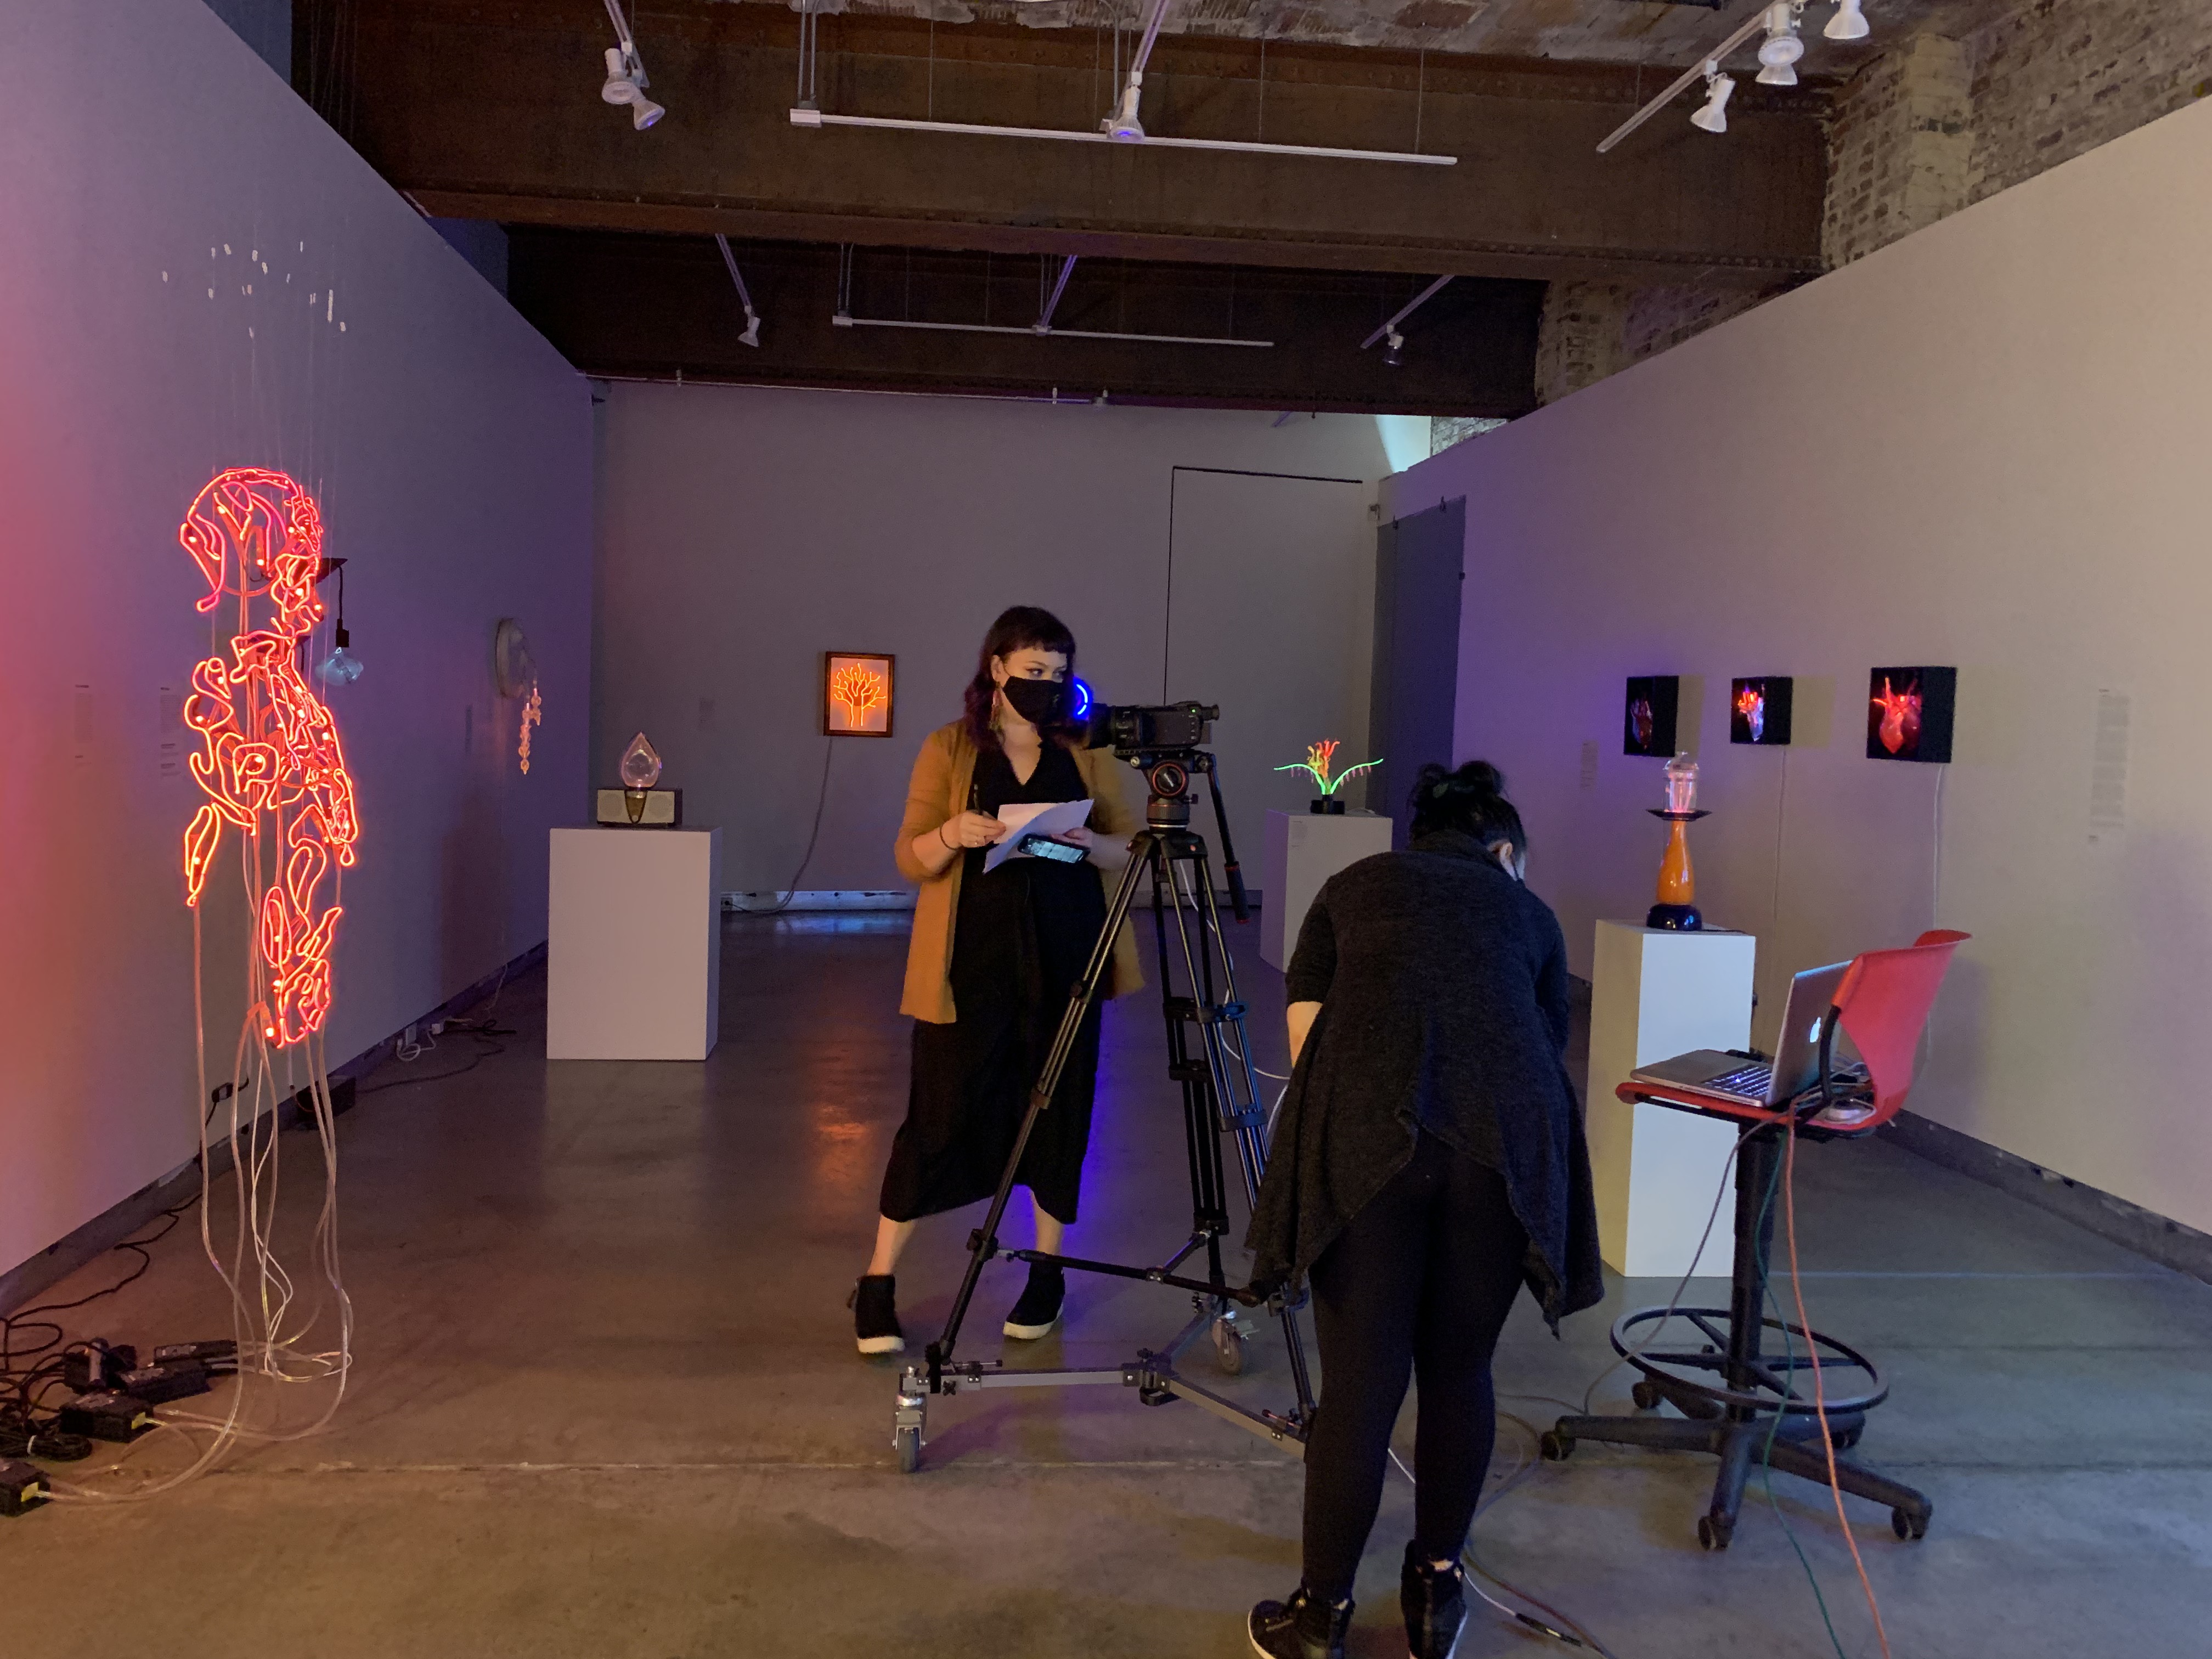 An image of my supervisor, Valerie Bundy, standing before a neon artwork in the Pittsburgh Glass Center's gallery. There is also a camera and laptop in front of her in order to communicate with the class via Zoom. Another employee stands behind the camera to help zoom in and out.